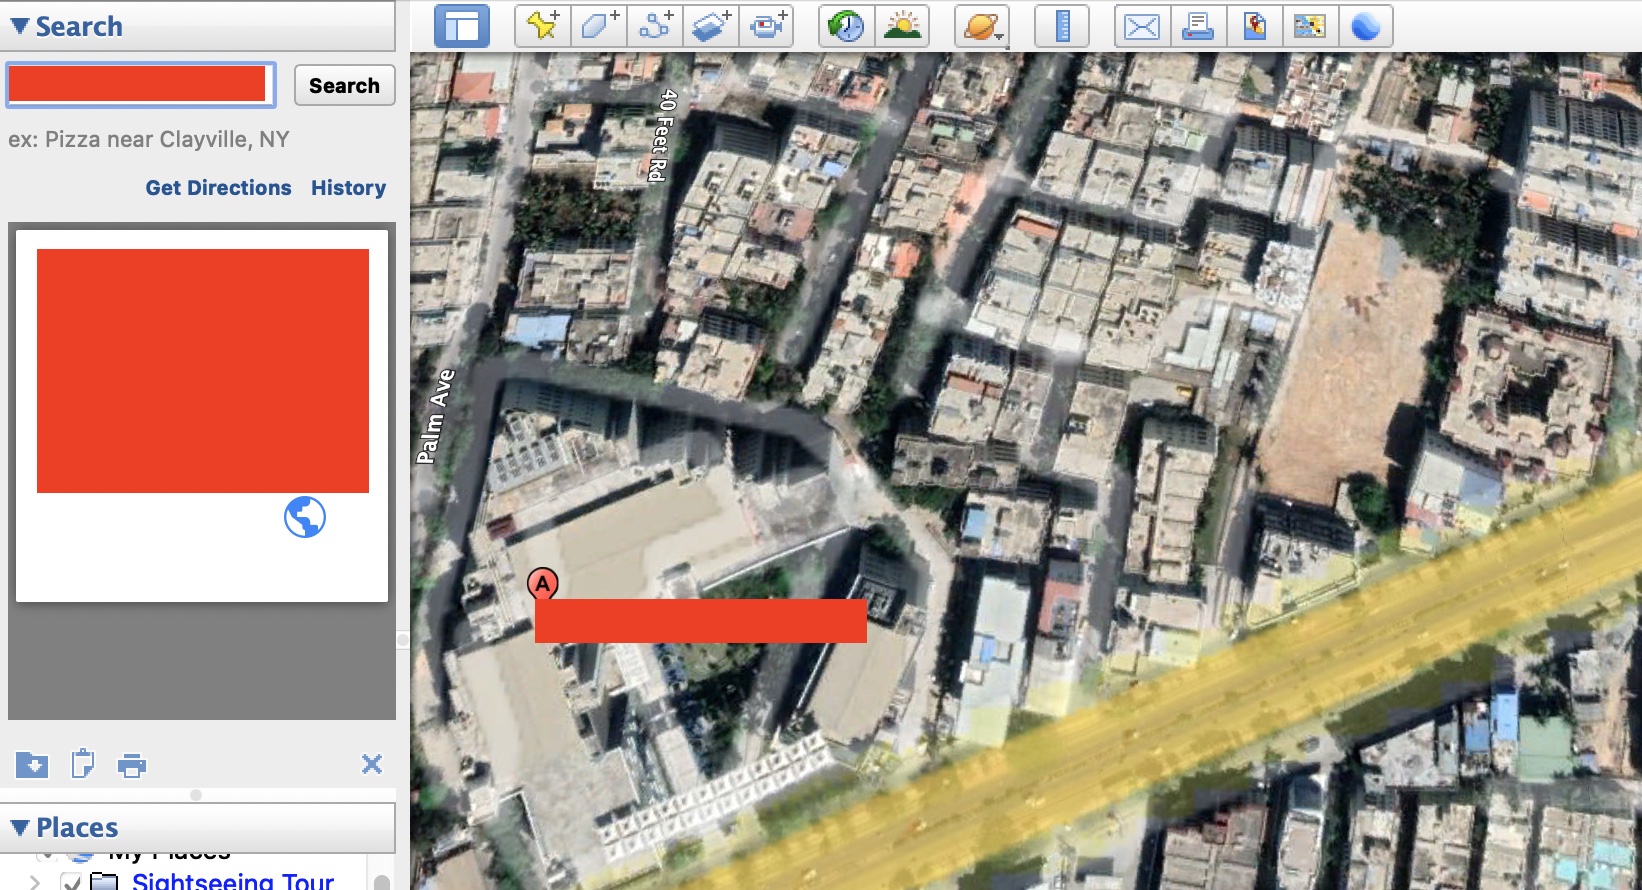 How to add an image icon to a place on Google Earth